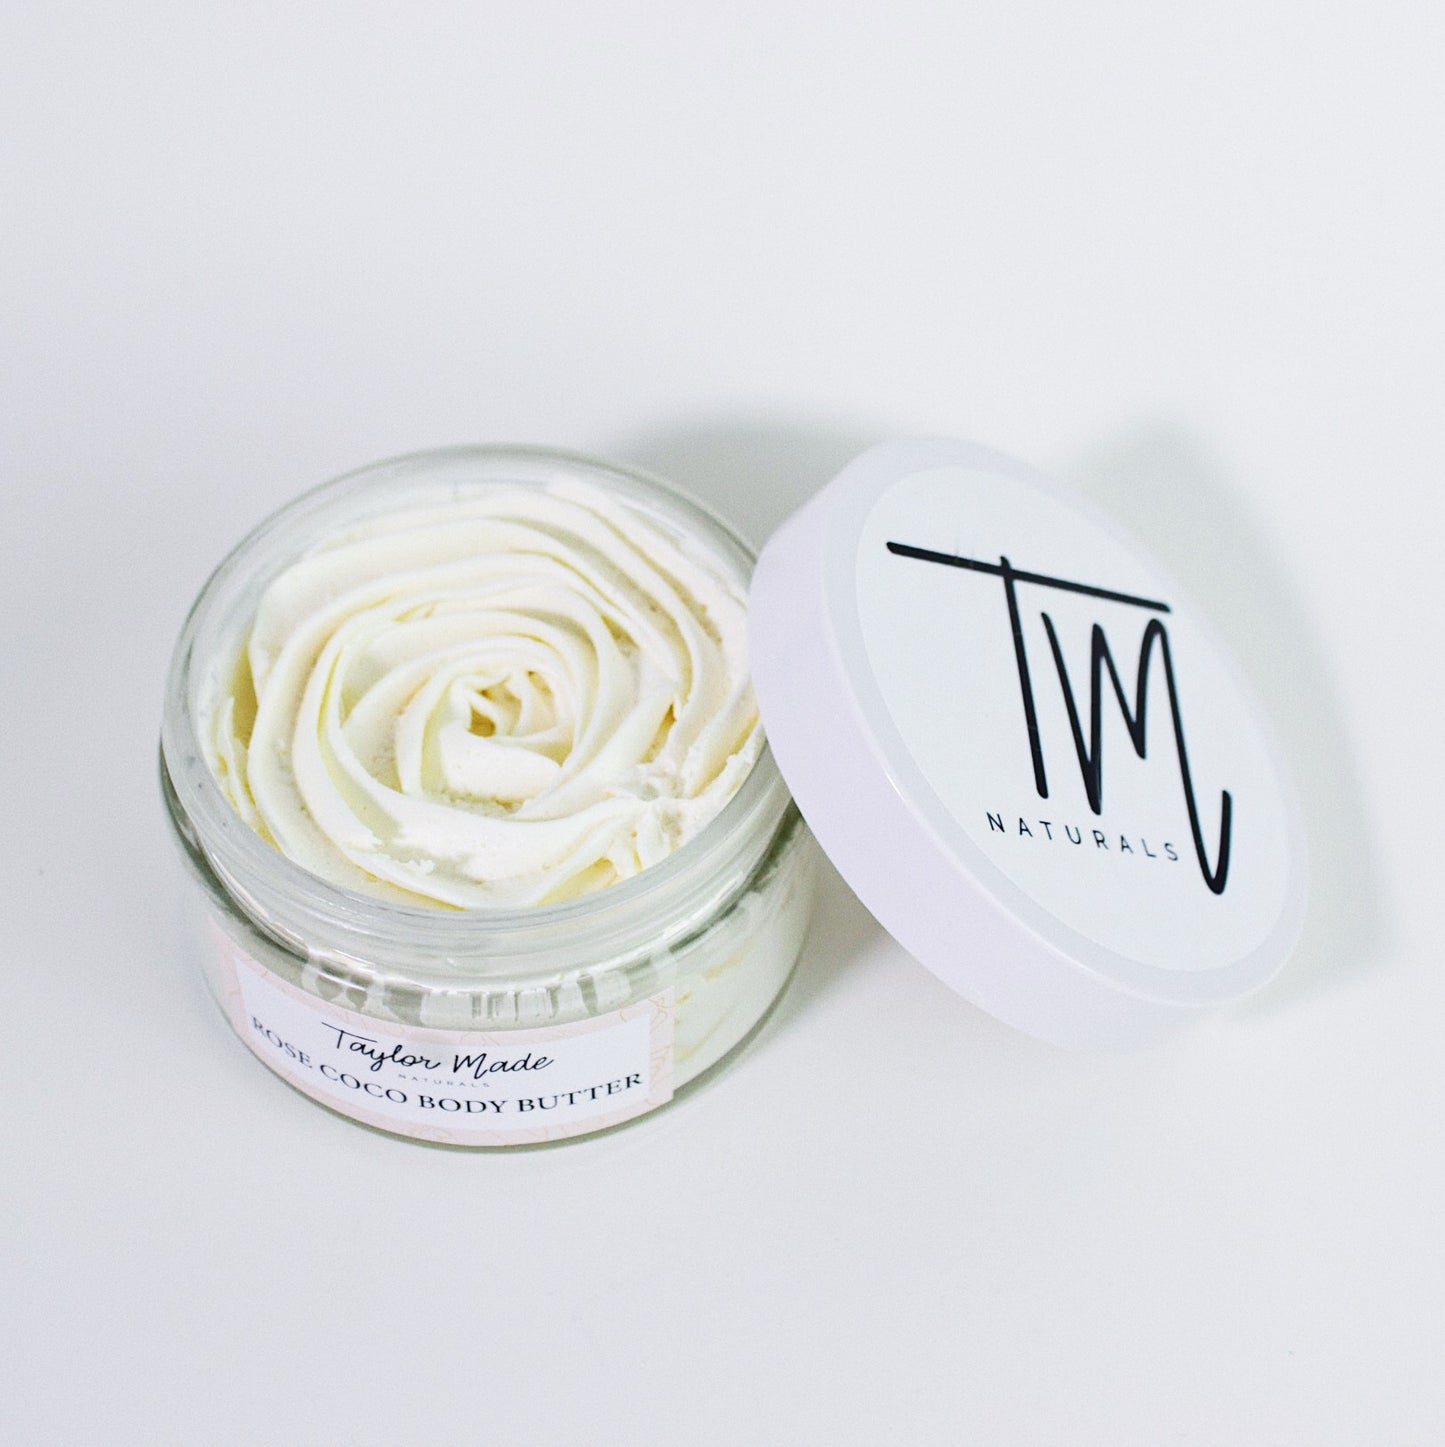 Rose Coco Body Butter